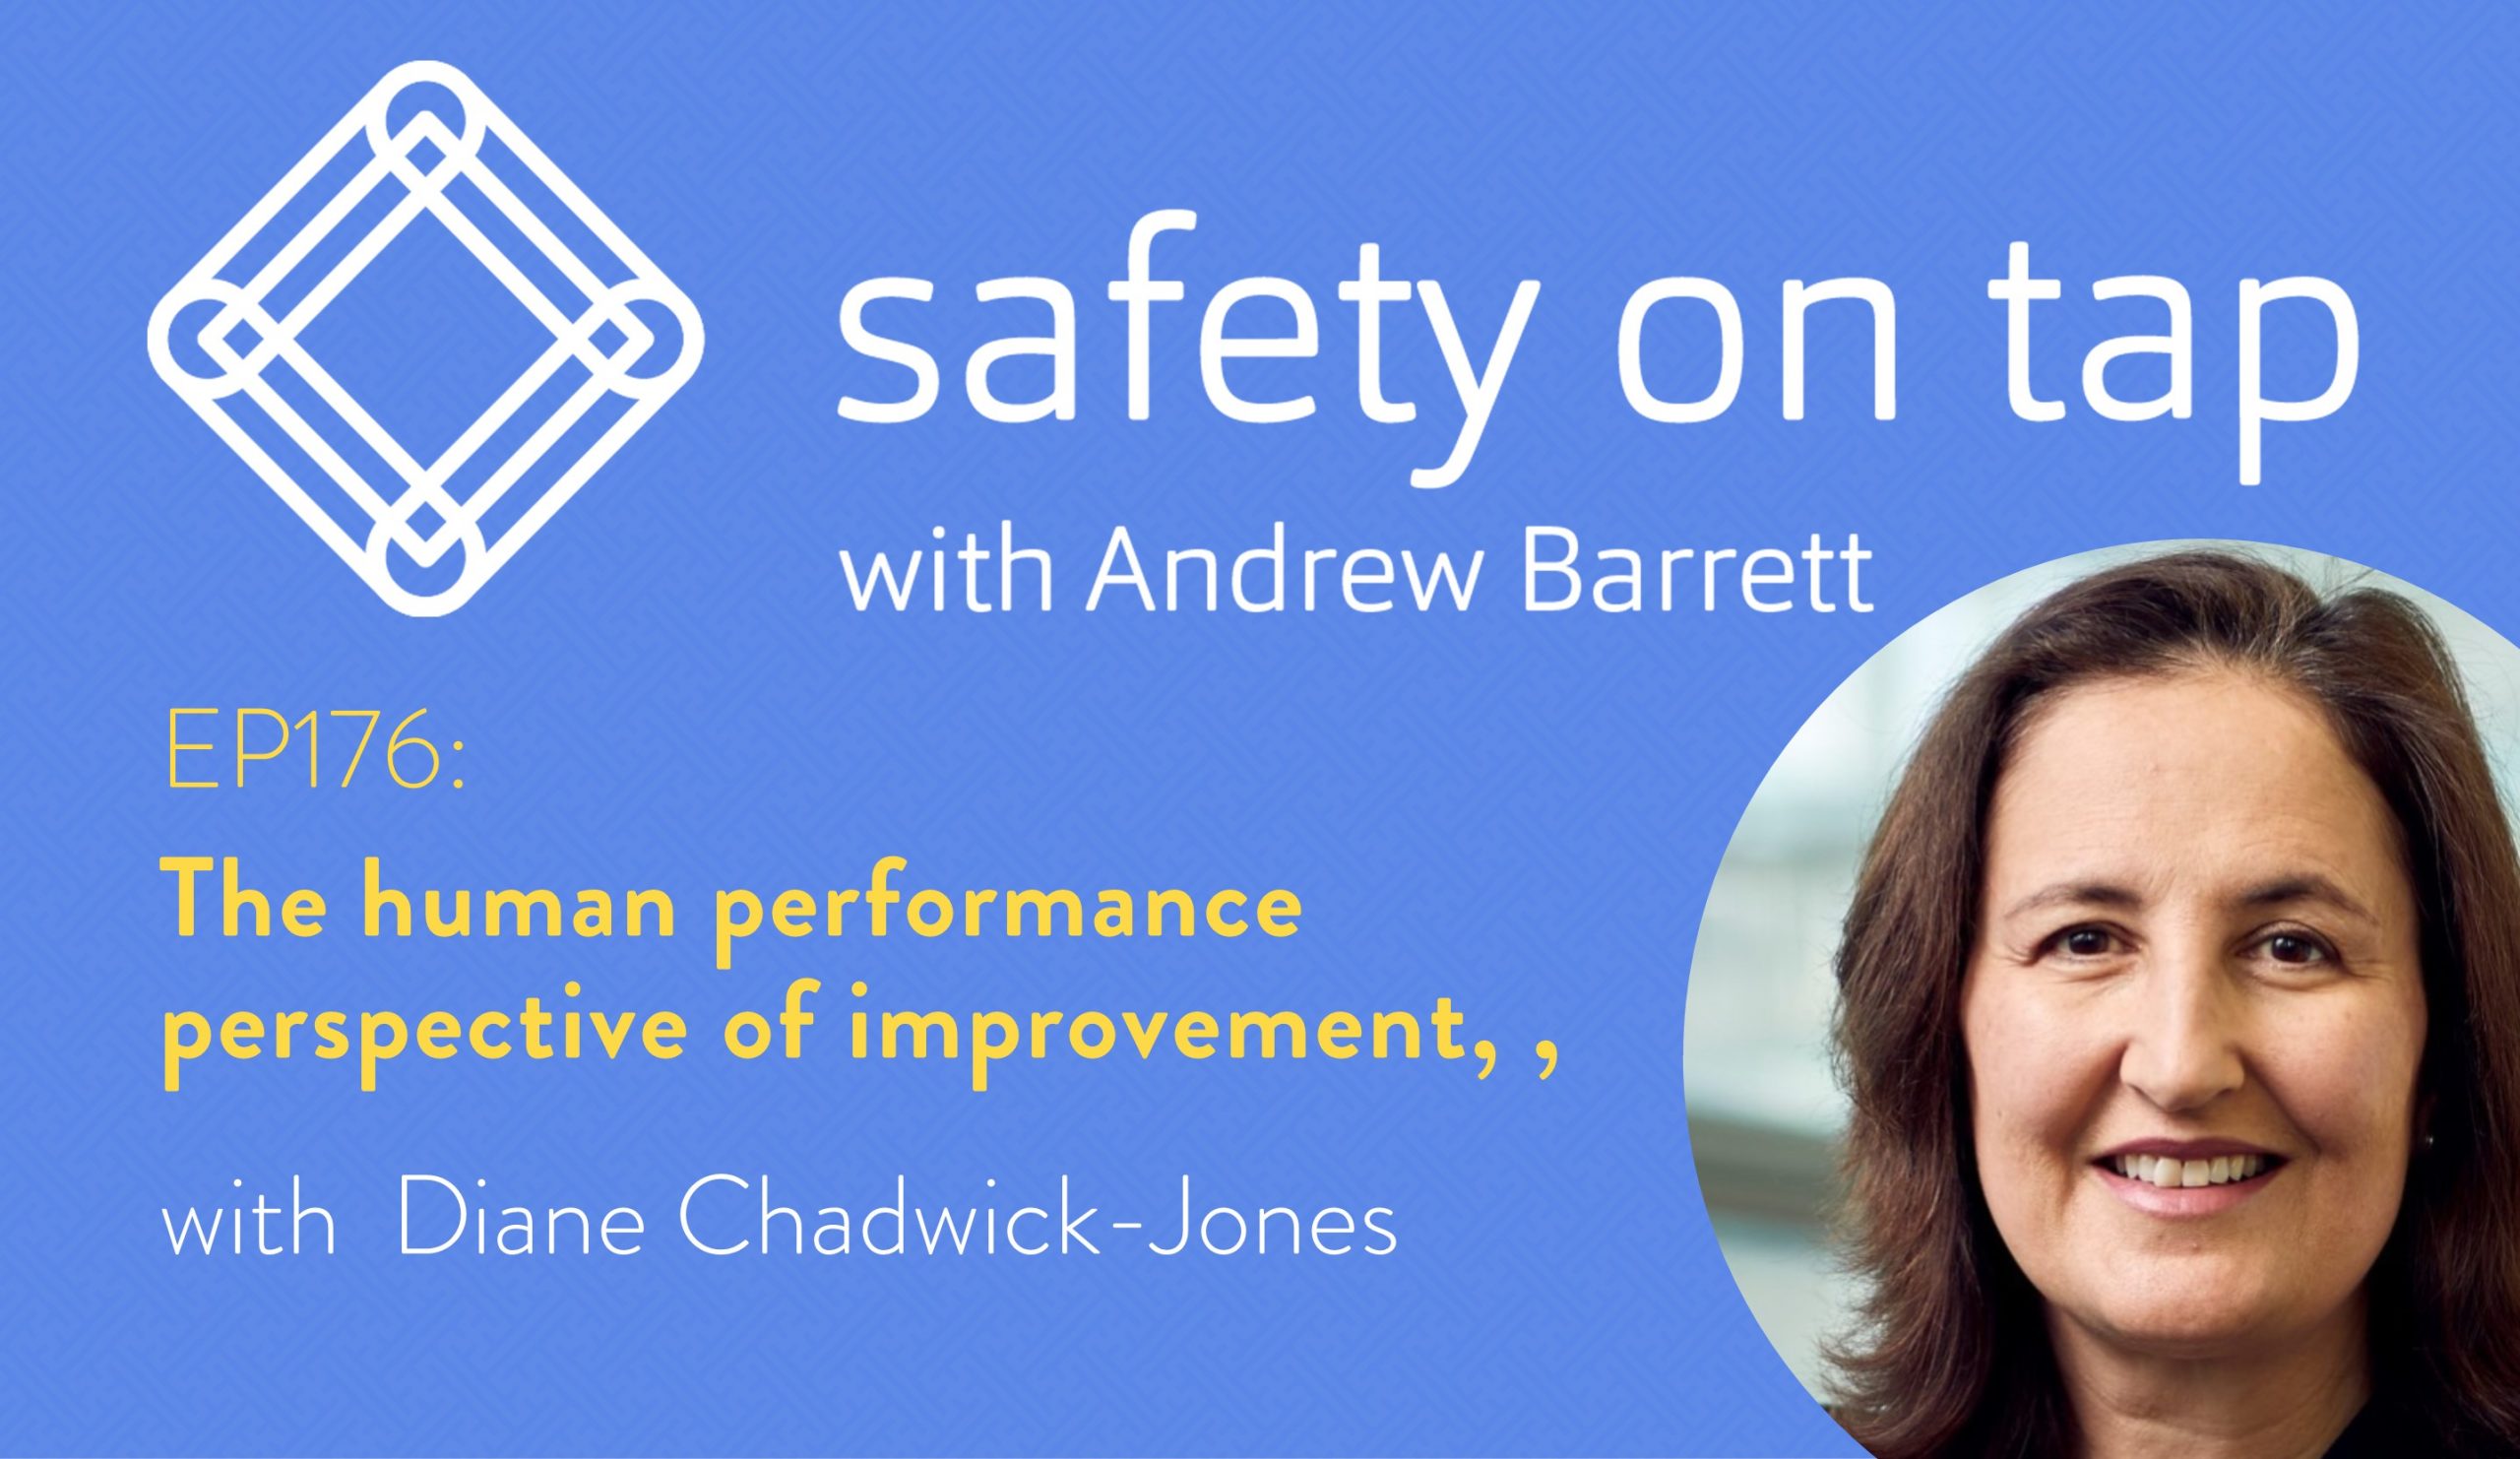 Ep176: The human performance perspective of improvement, with Diane Chadwick-Jones